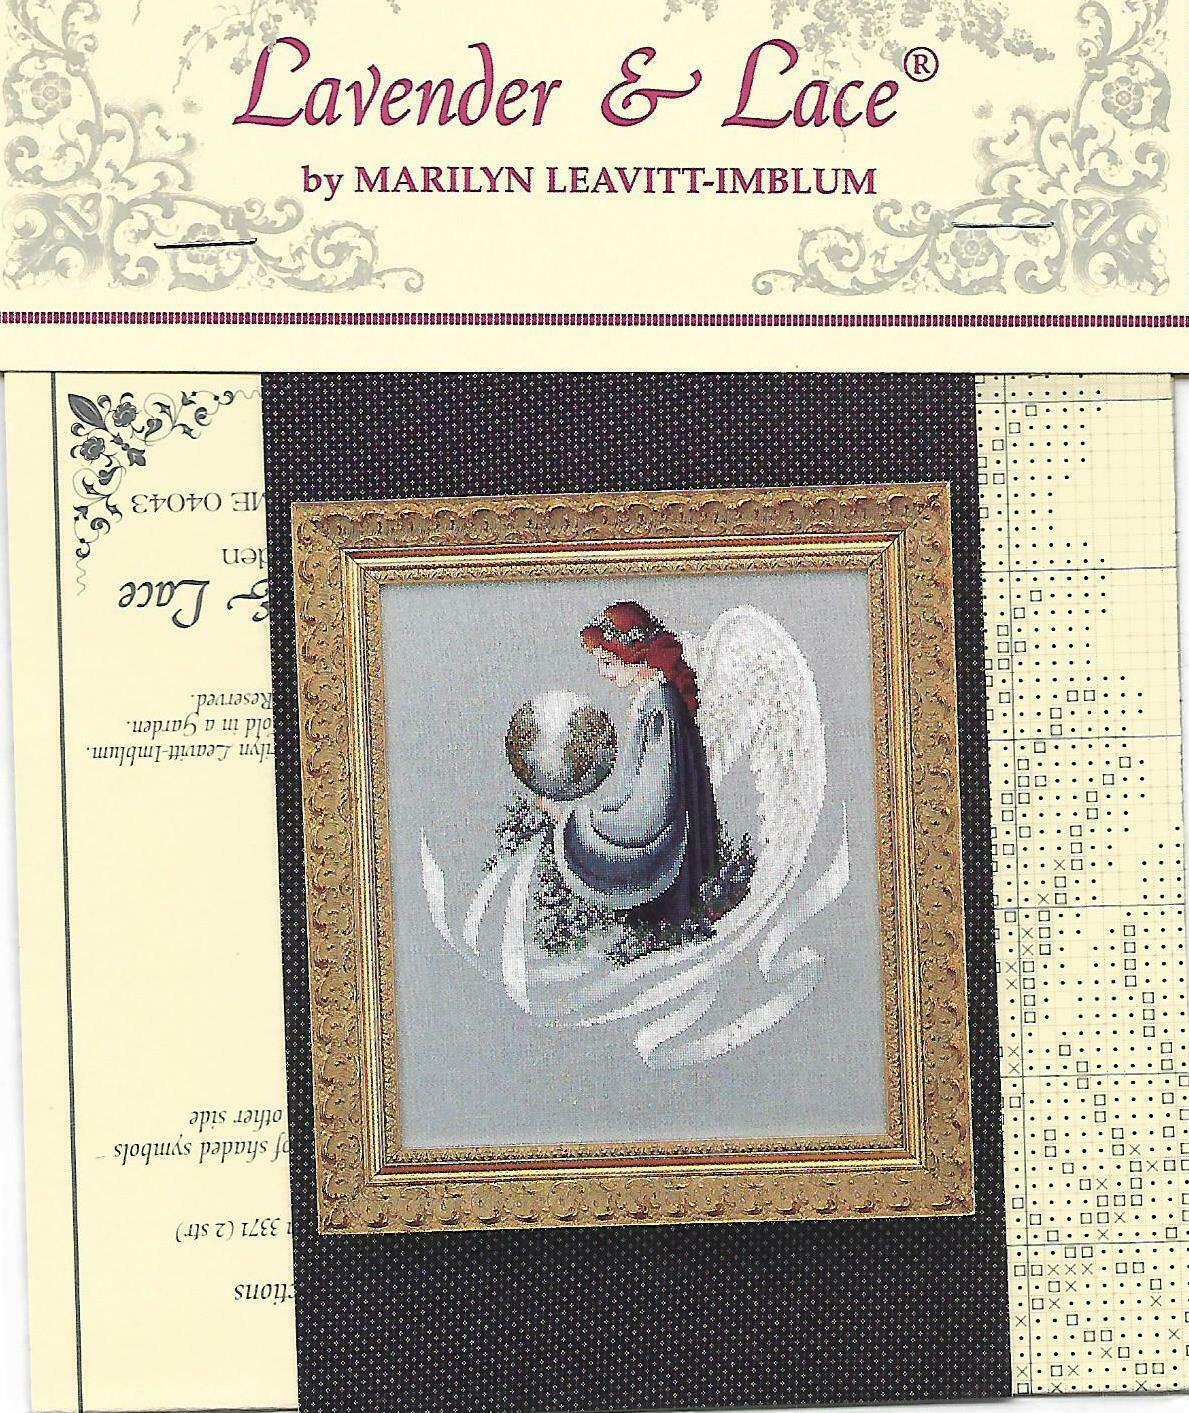 SALE! Complete Xstitch Materials L&L16 Earth Angel By Lavender and Lace